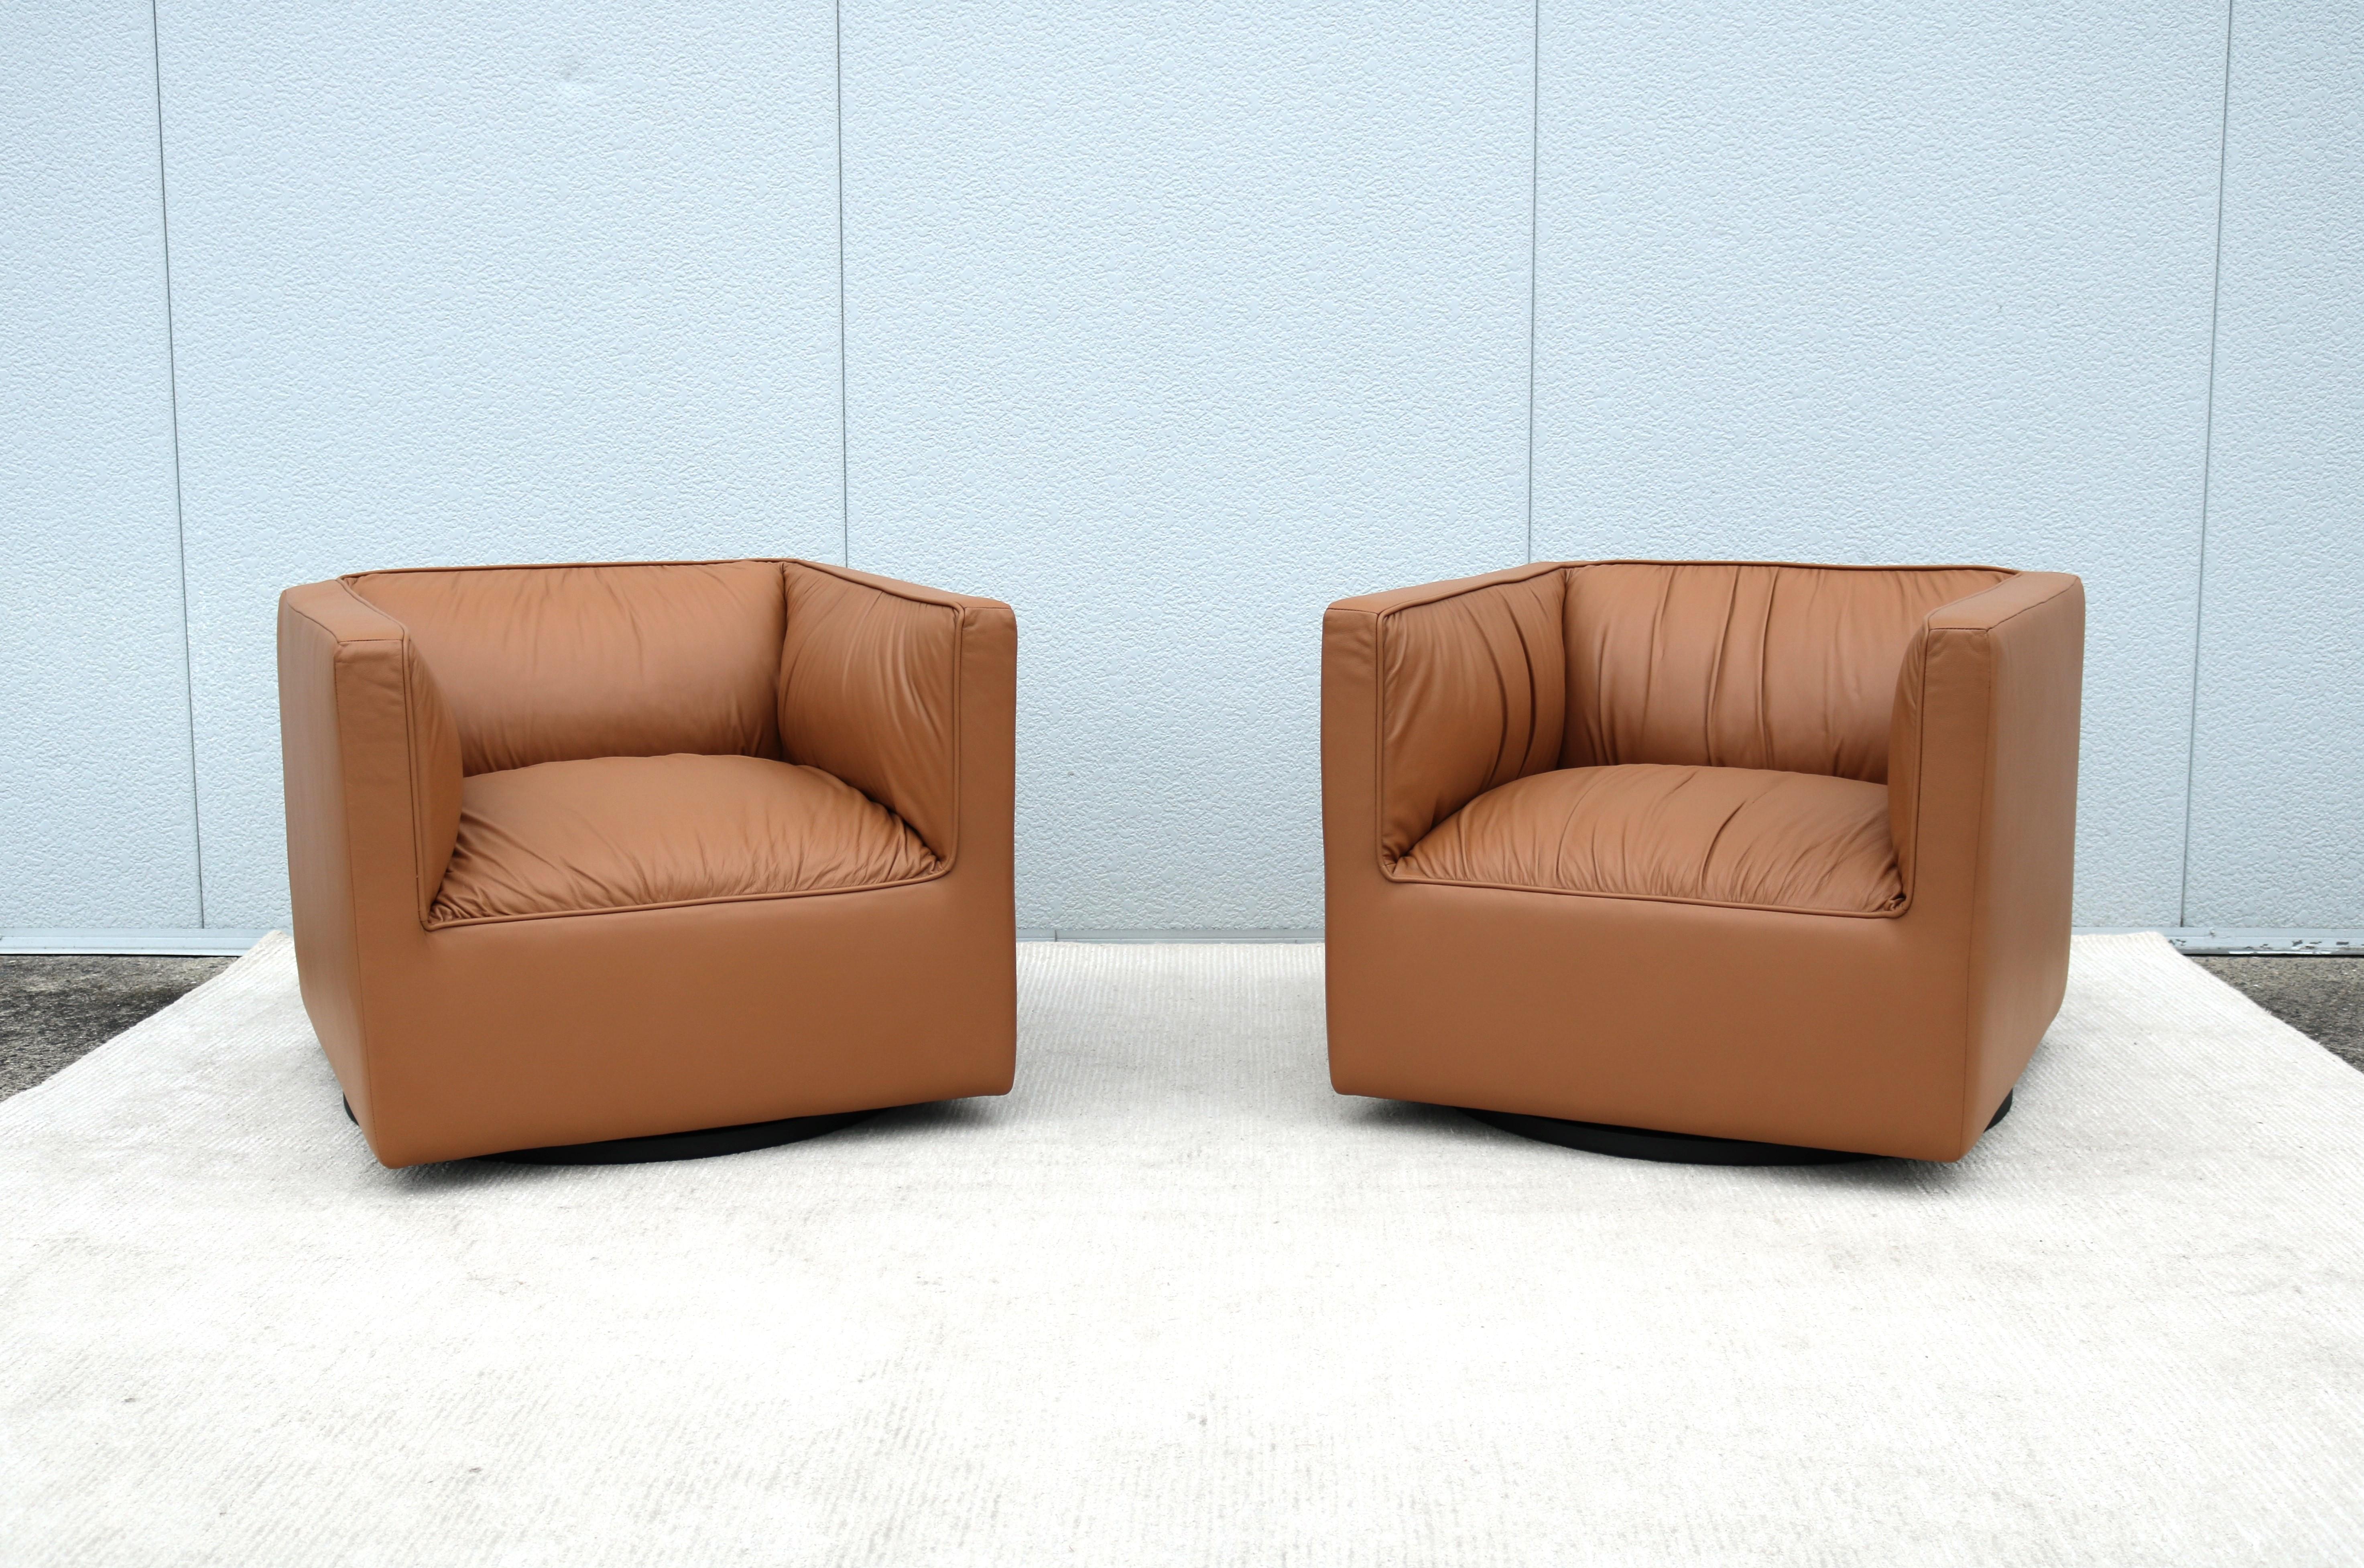 American Modern Toan Nguyen for Studio TK Infinito Leather Swivel Lounge Chairs - a Pair For Sale